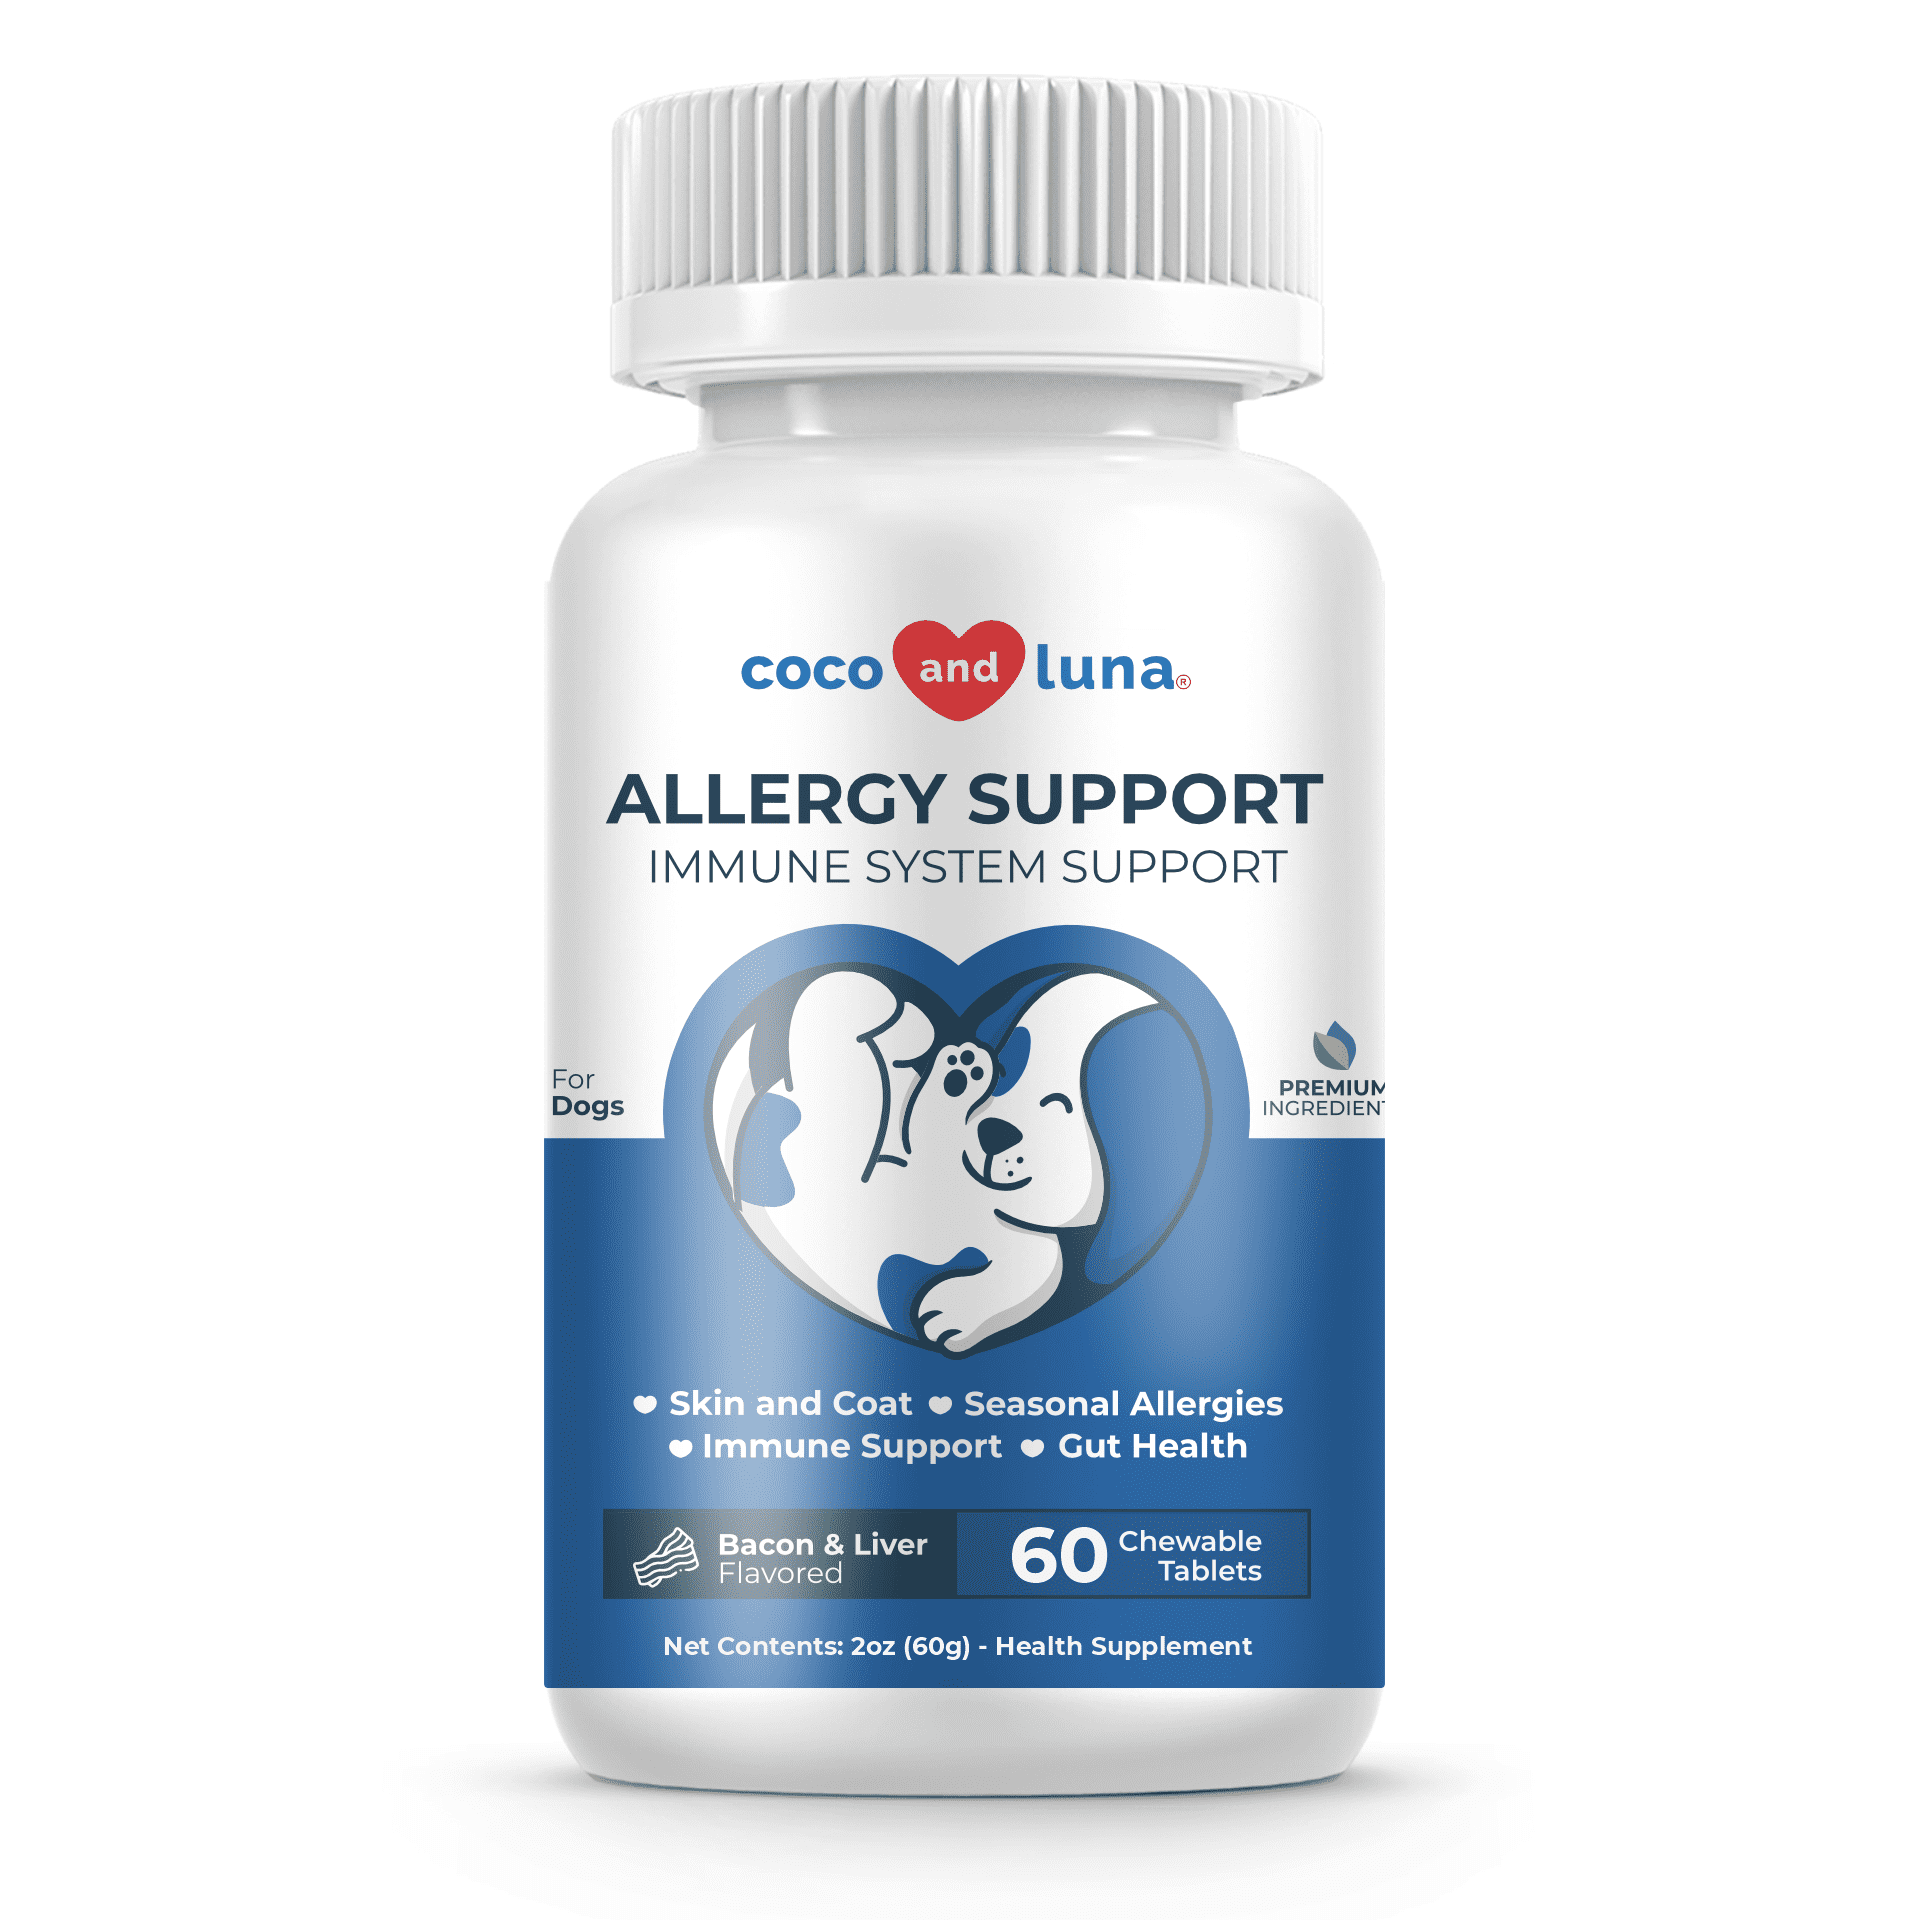 Allergy Support for Dogs - 60 Chewable Tablets - Coco and Luna